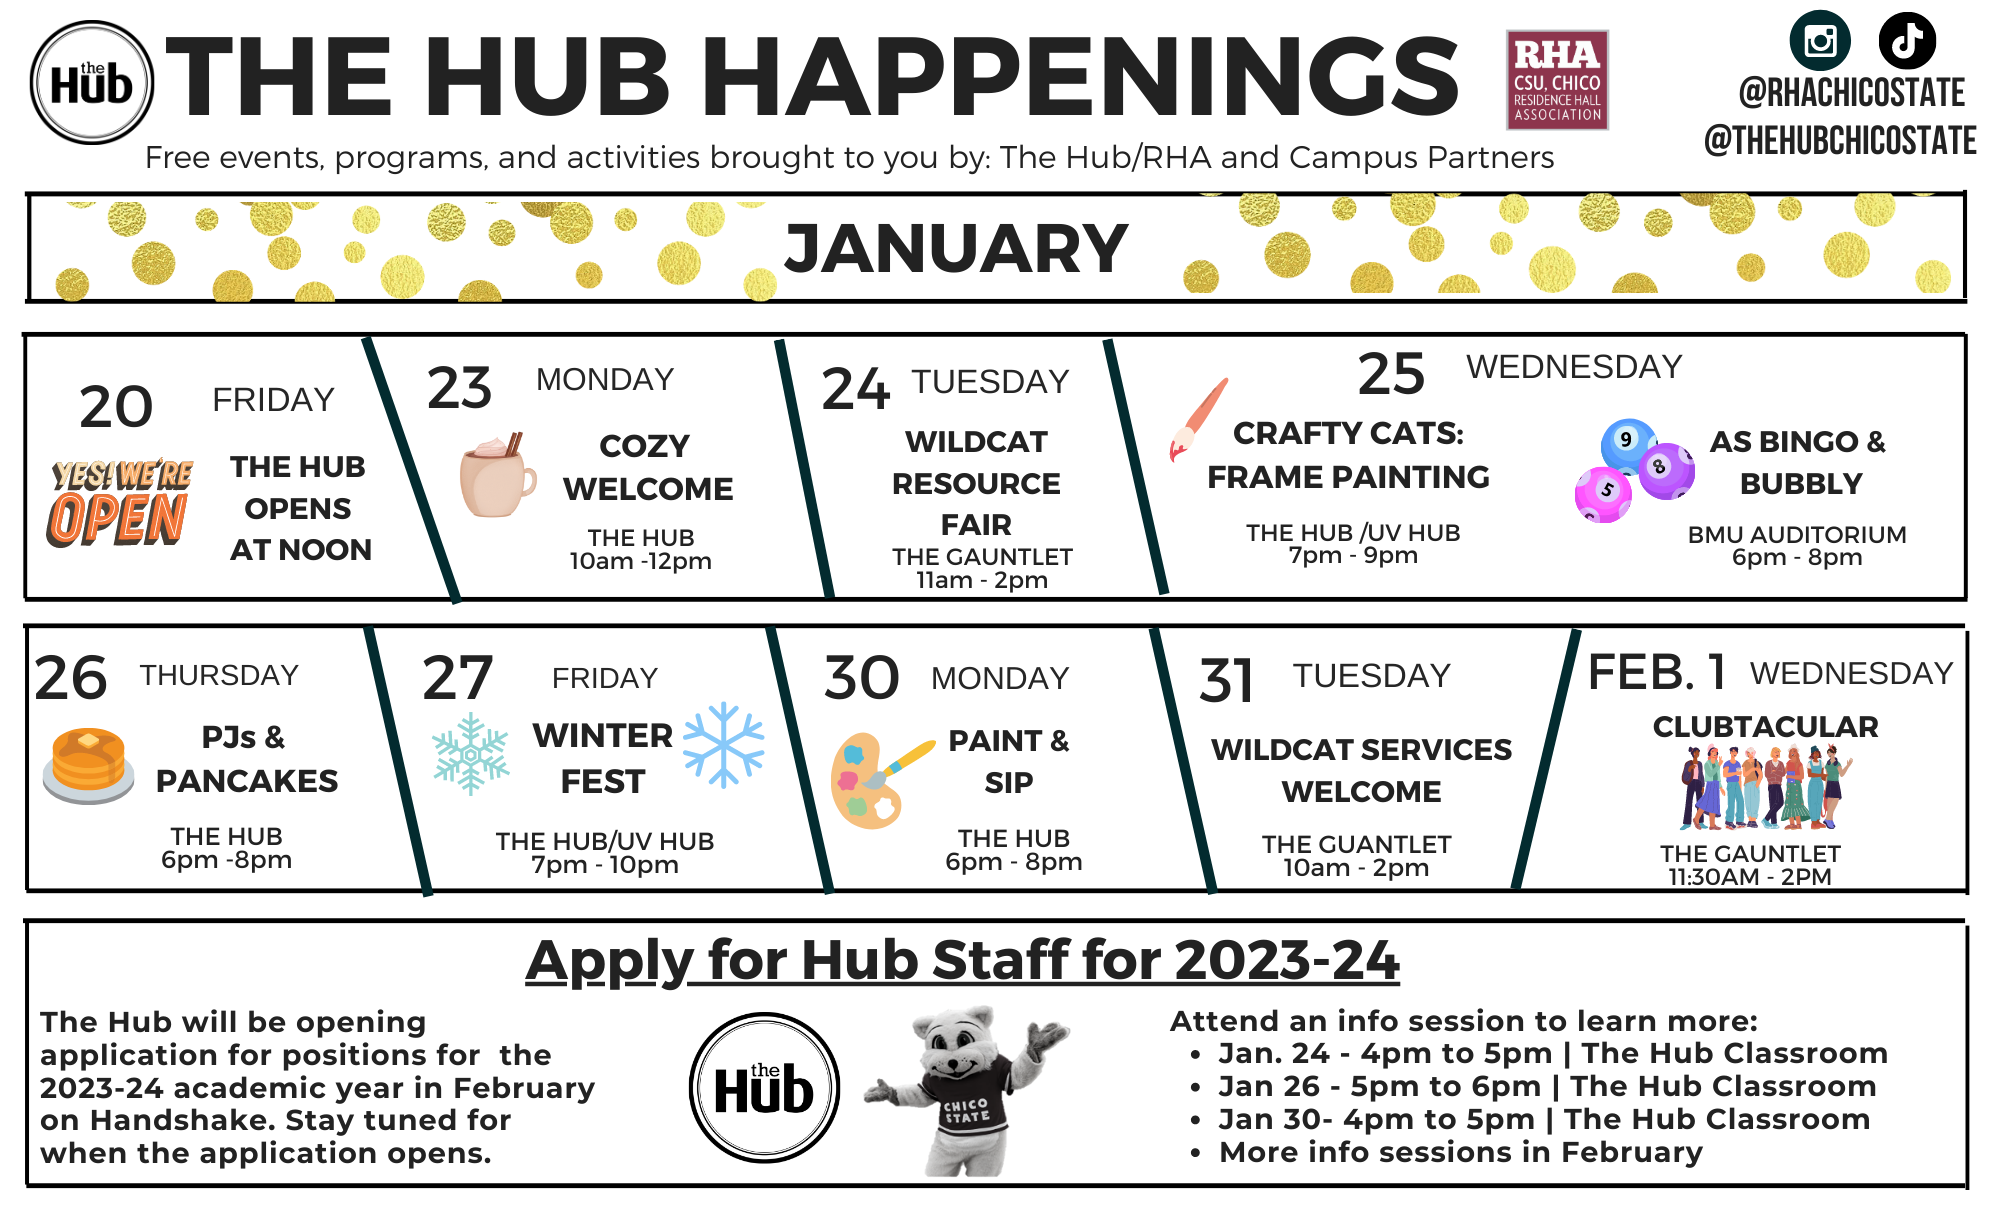 Calendar of events for The Hub in January 2023.